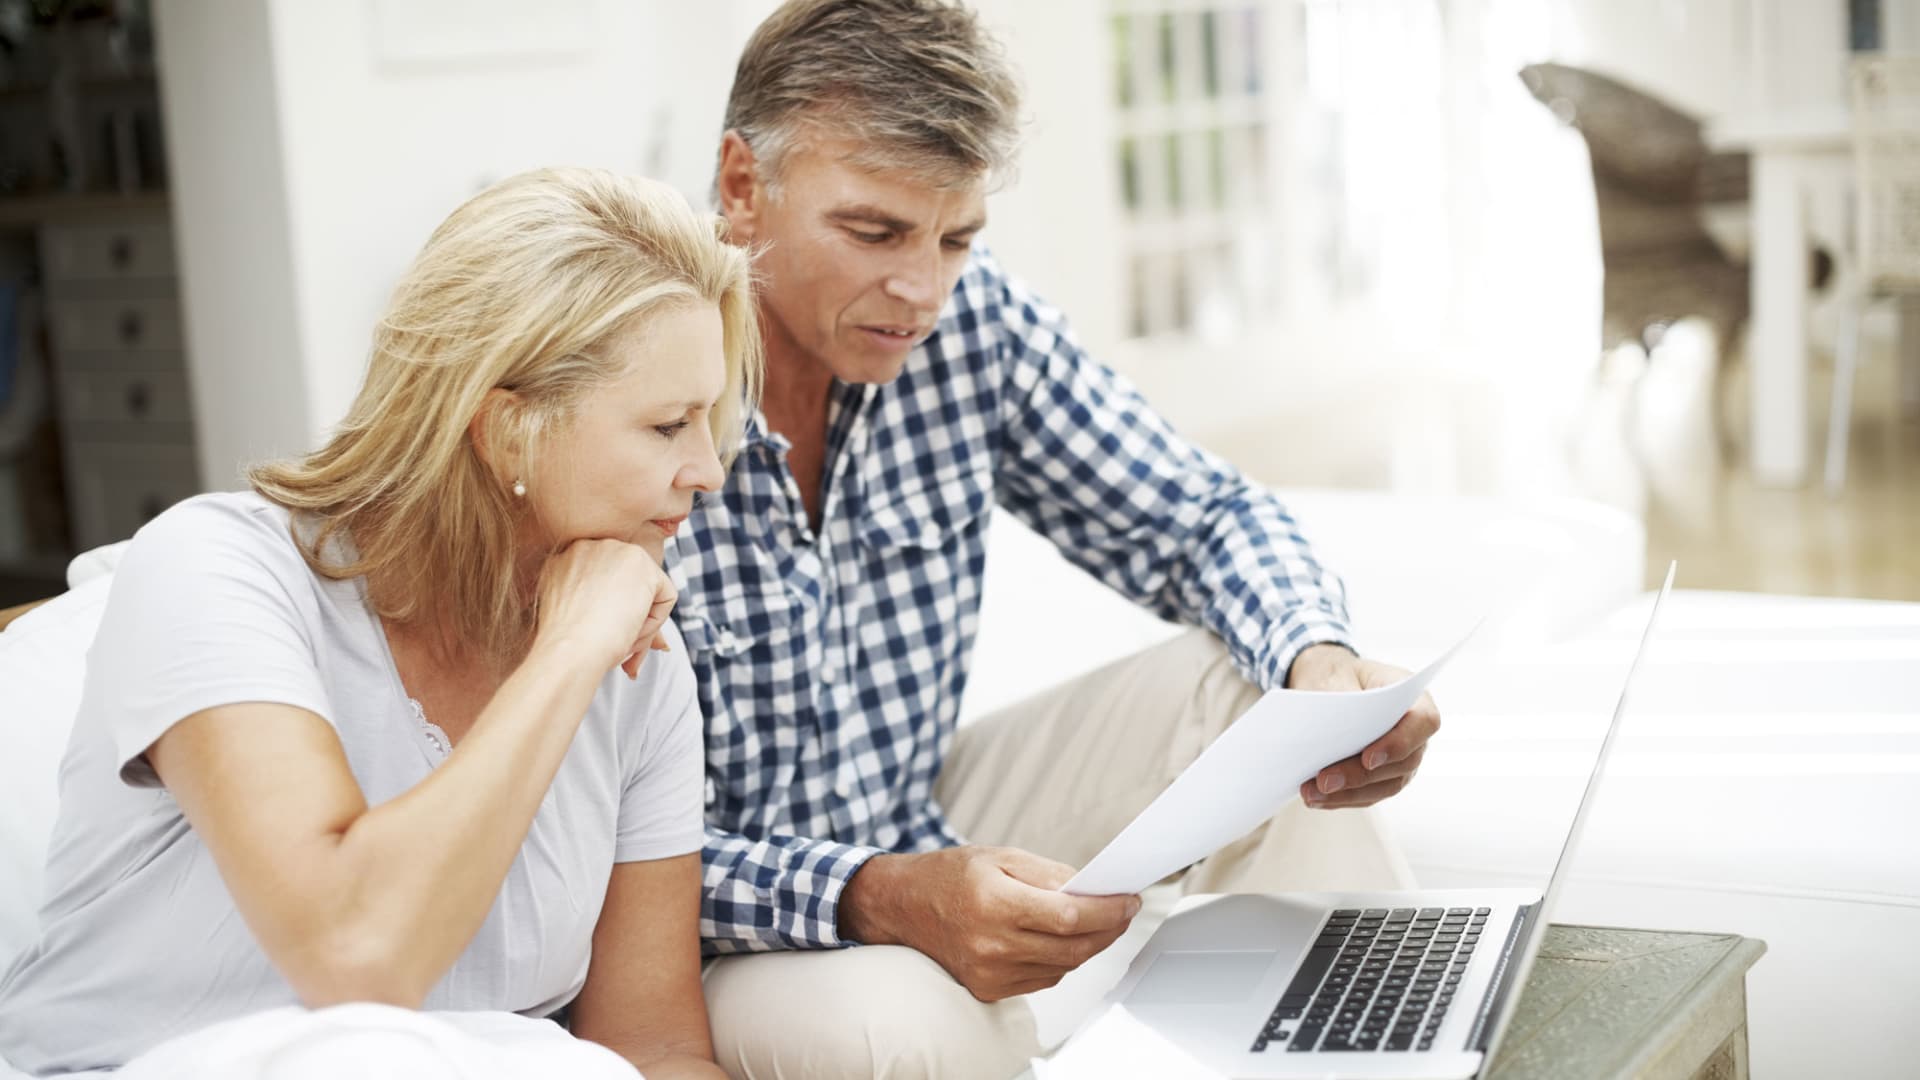 Getting close to retirement? Be sure your plan includes managing this risk